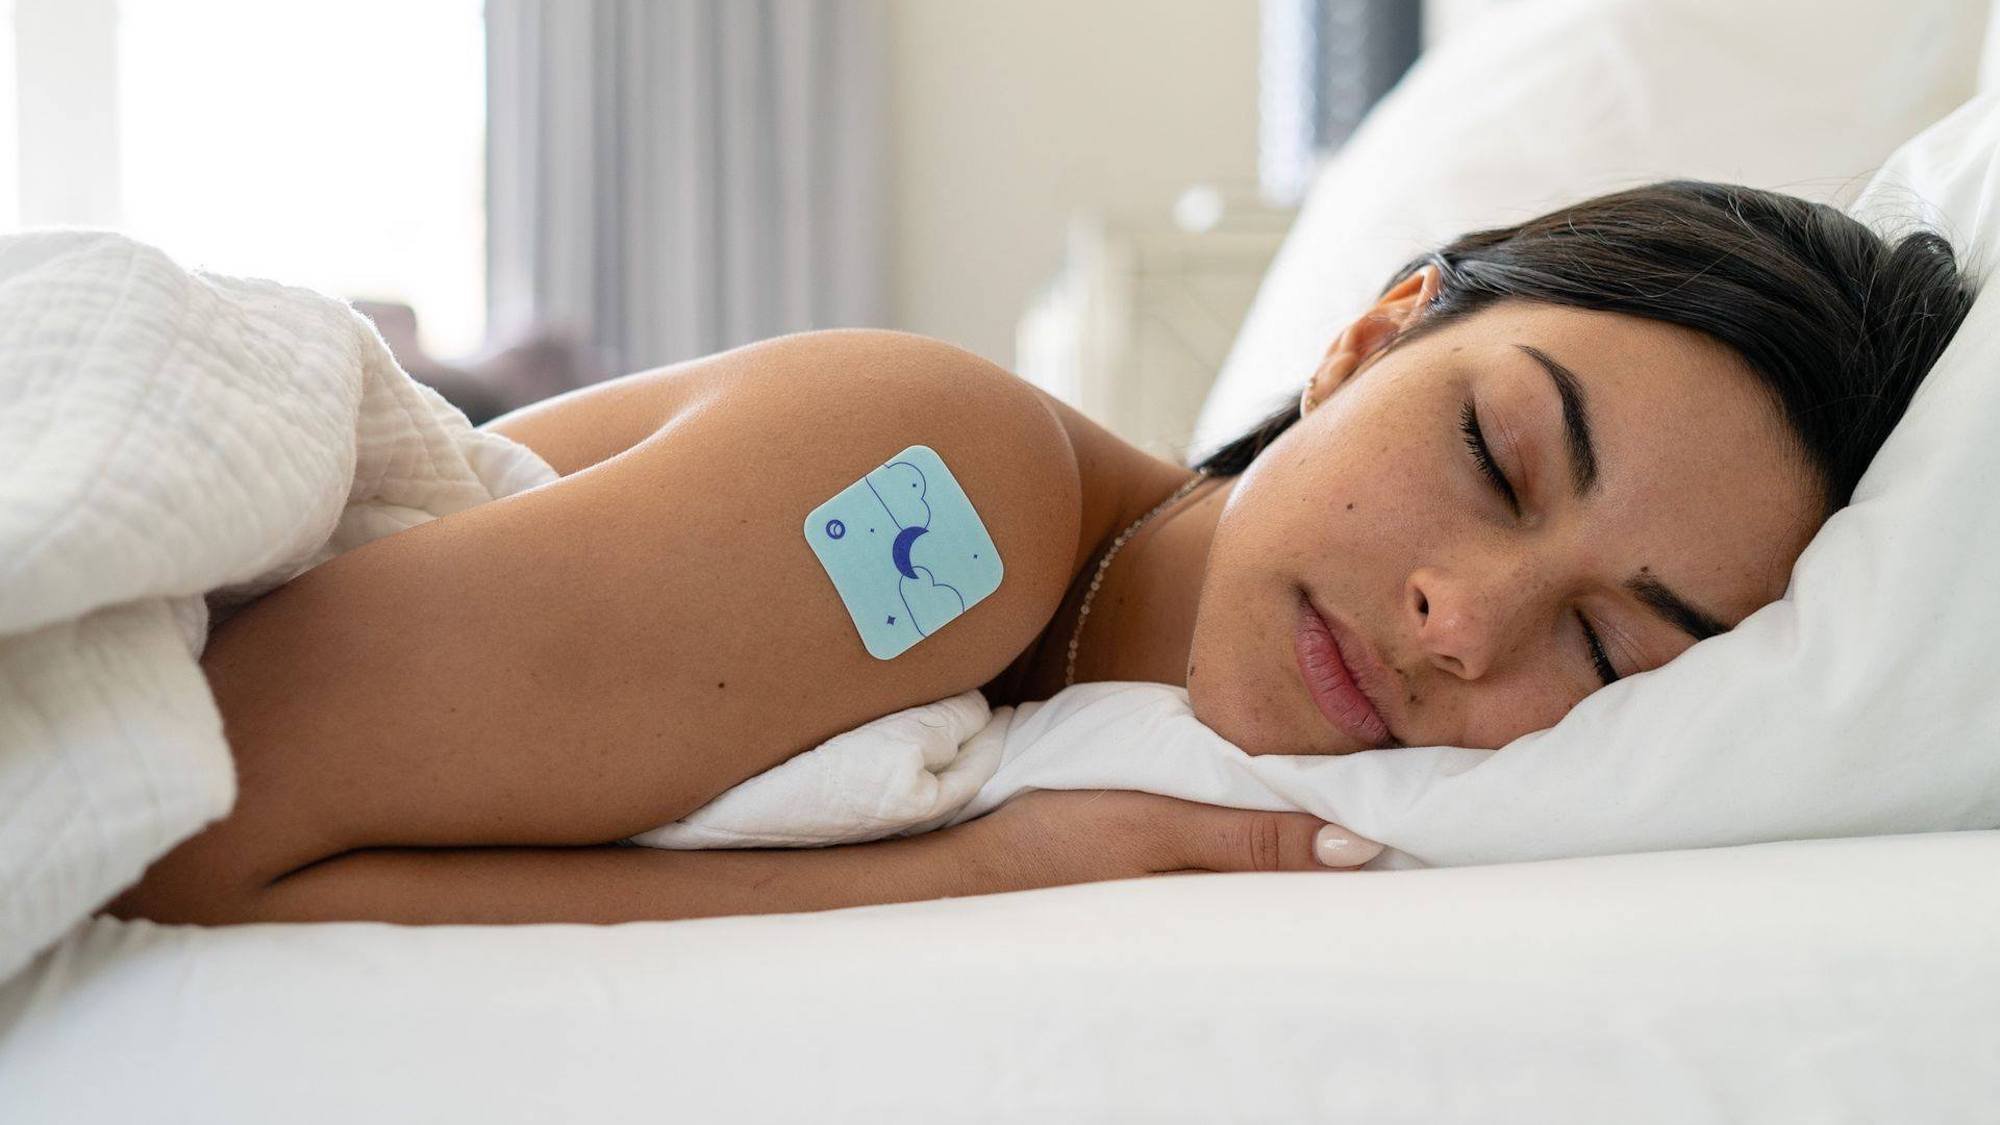 Klova ZPatch Sleeping Patch uses natural ingredients to help you rest